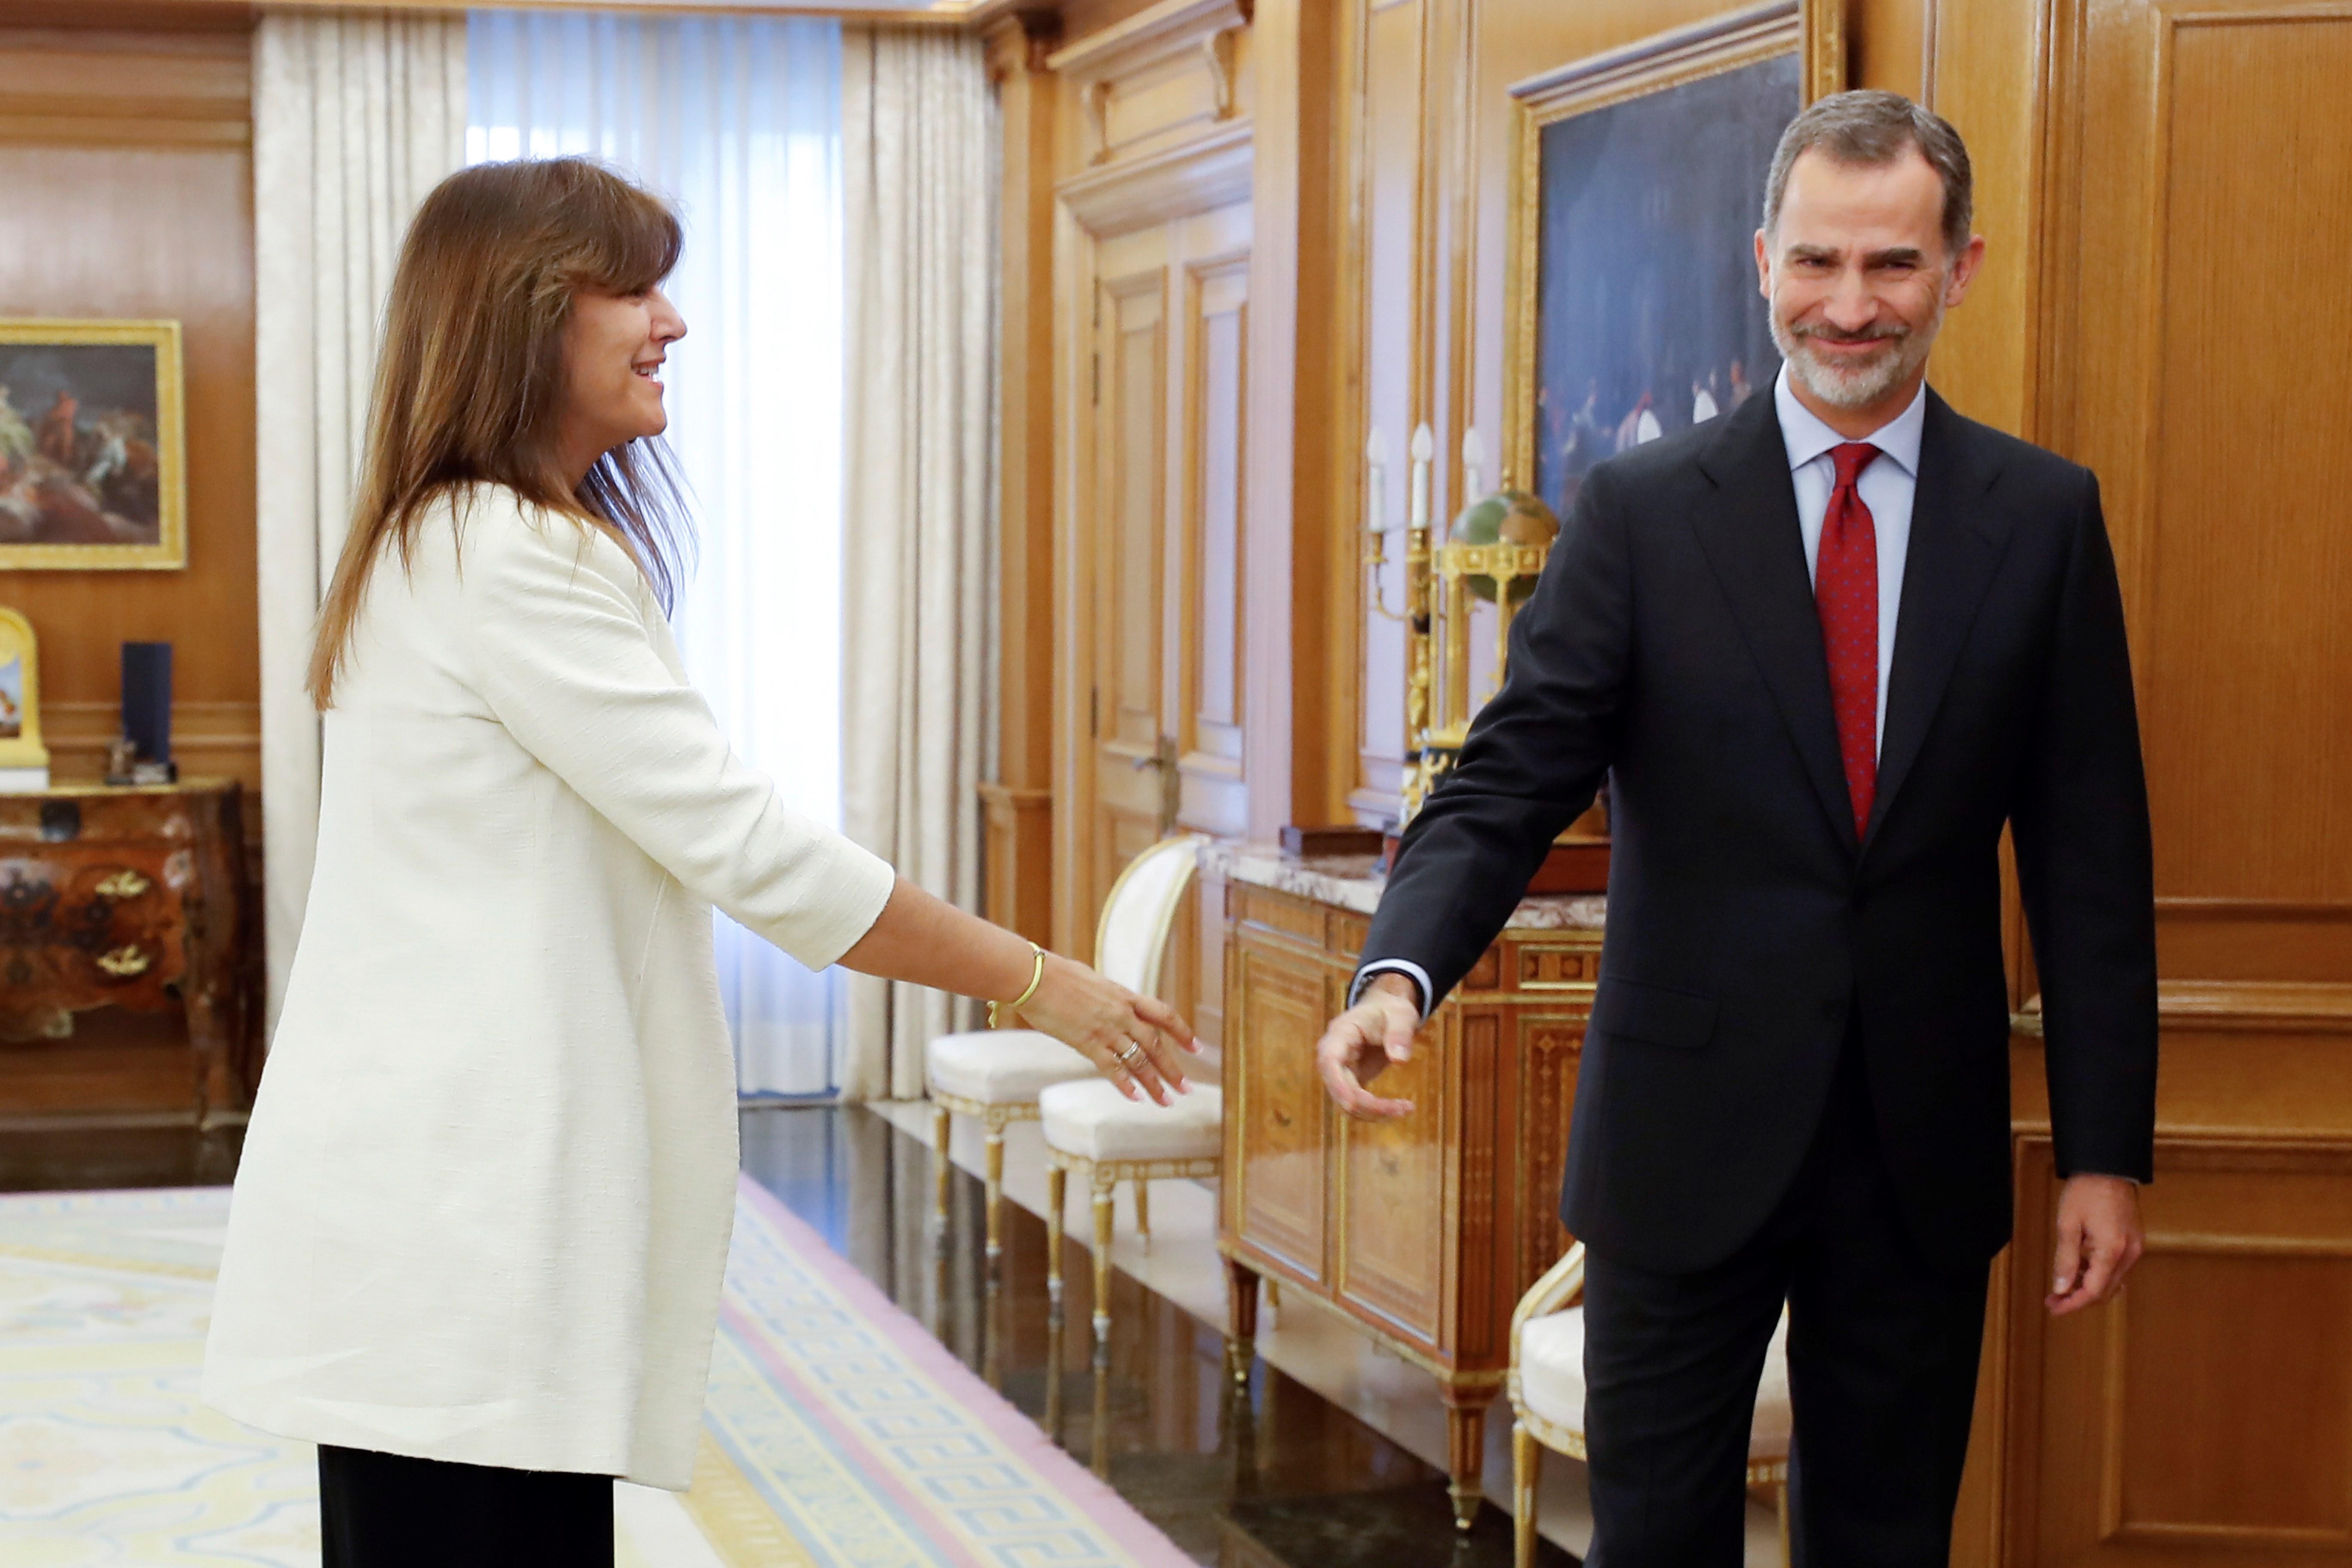 Parties call on Electoral Commission to suspend king Felipe's visit to Catalonia